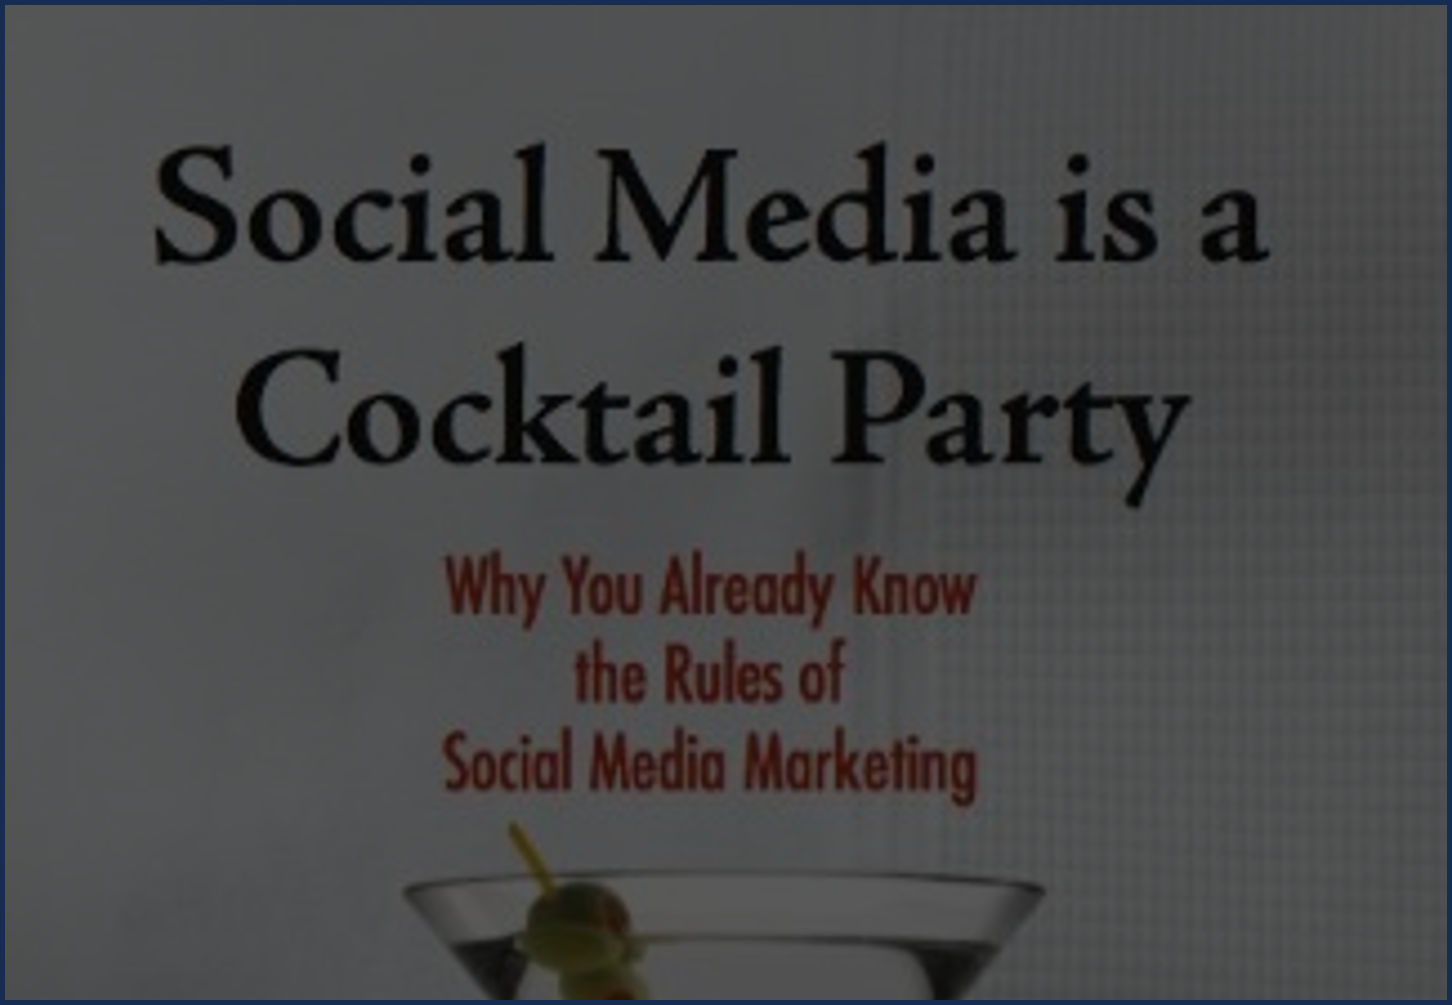 32 Signs You Might Be a Social Media Marketing O.G. [Video]